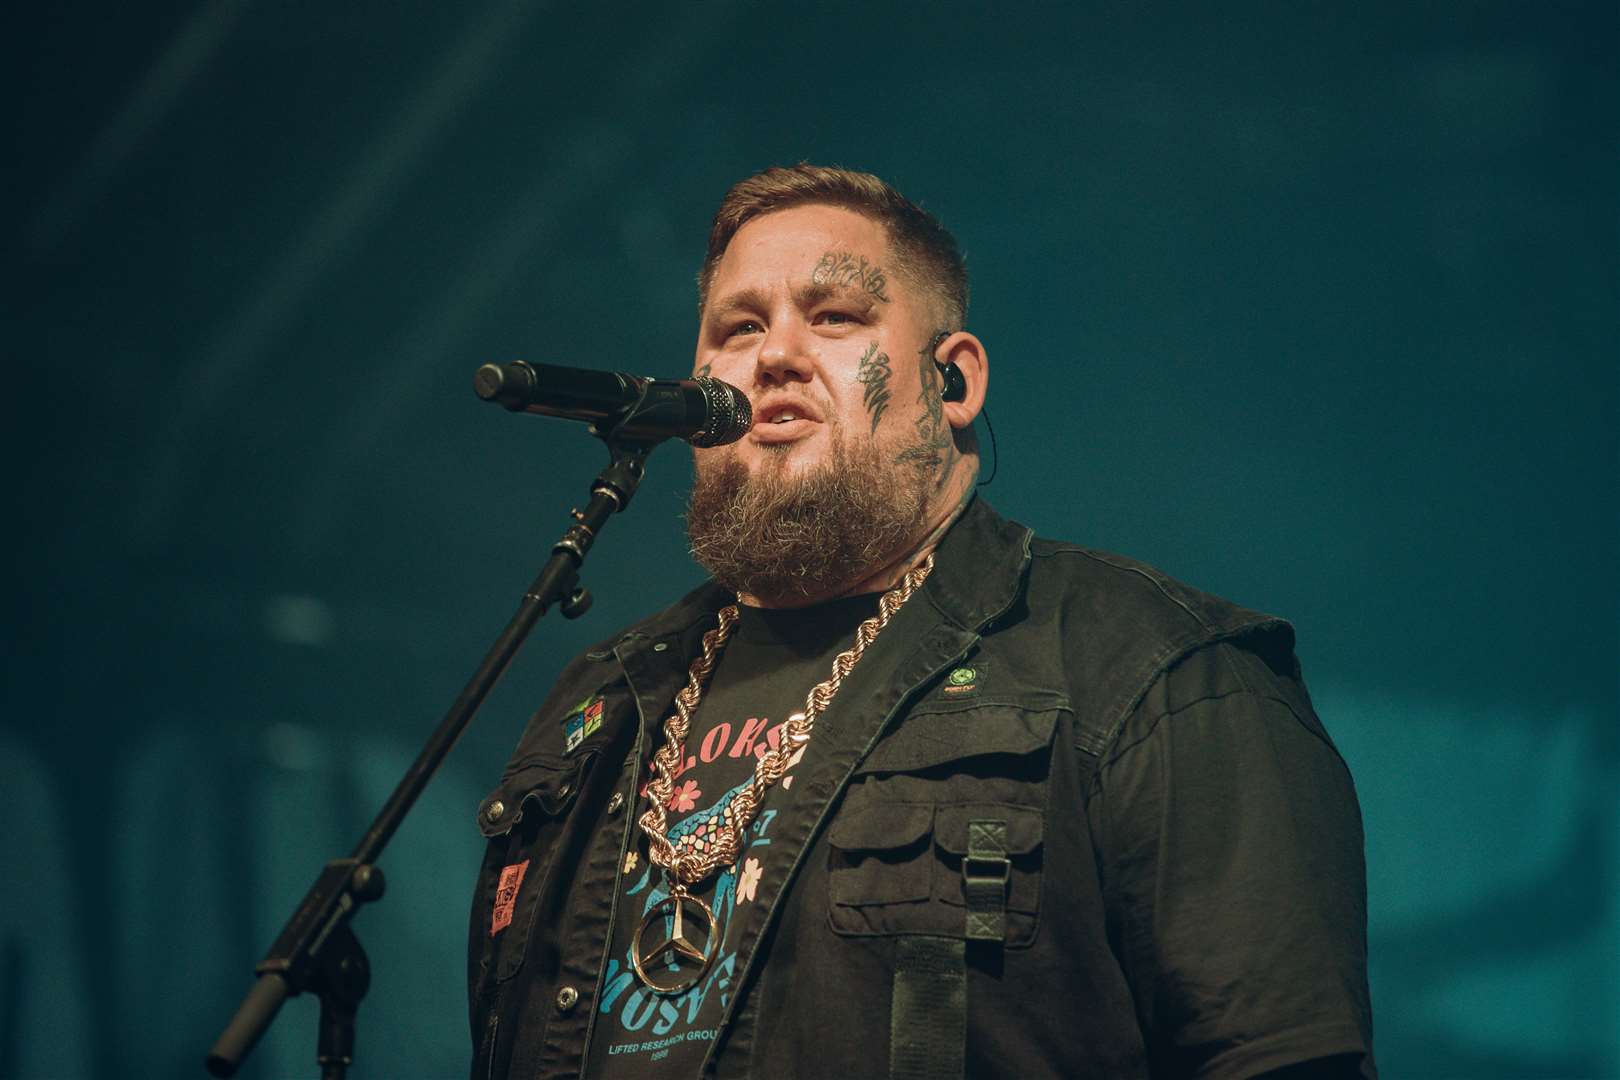 Rag’n’Bone Man, also known as Rory Graham, has been confirmed as a Big Top headliner at the Bught.